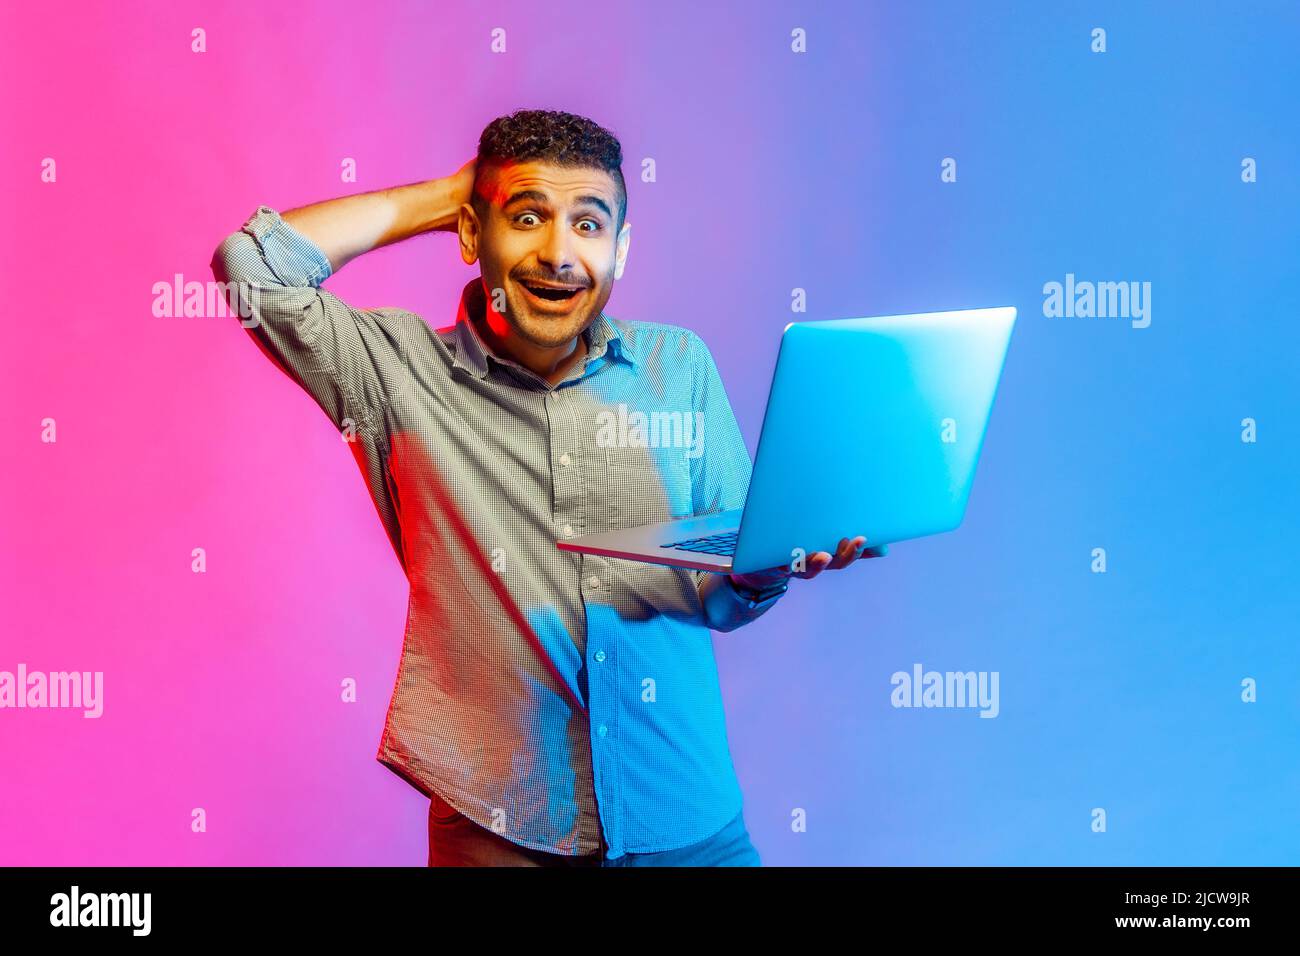 Portrait of man in shirt looking at camera with amazed expression, watching shocking content, surprised by news, raised arm. Indoor studio shot isolated on colorful neon light background. Stock Photo